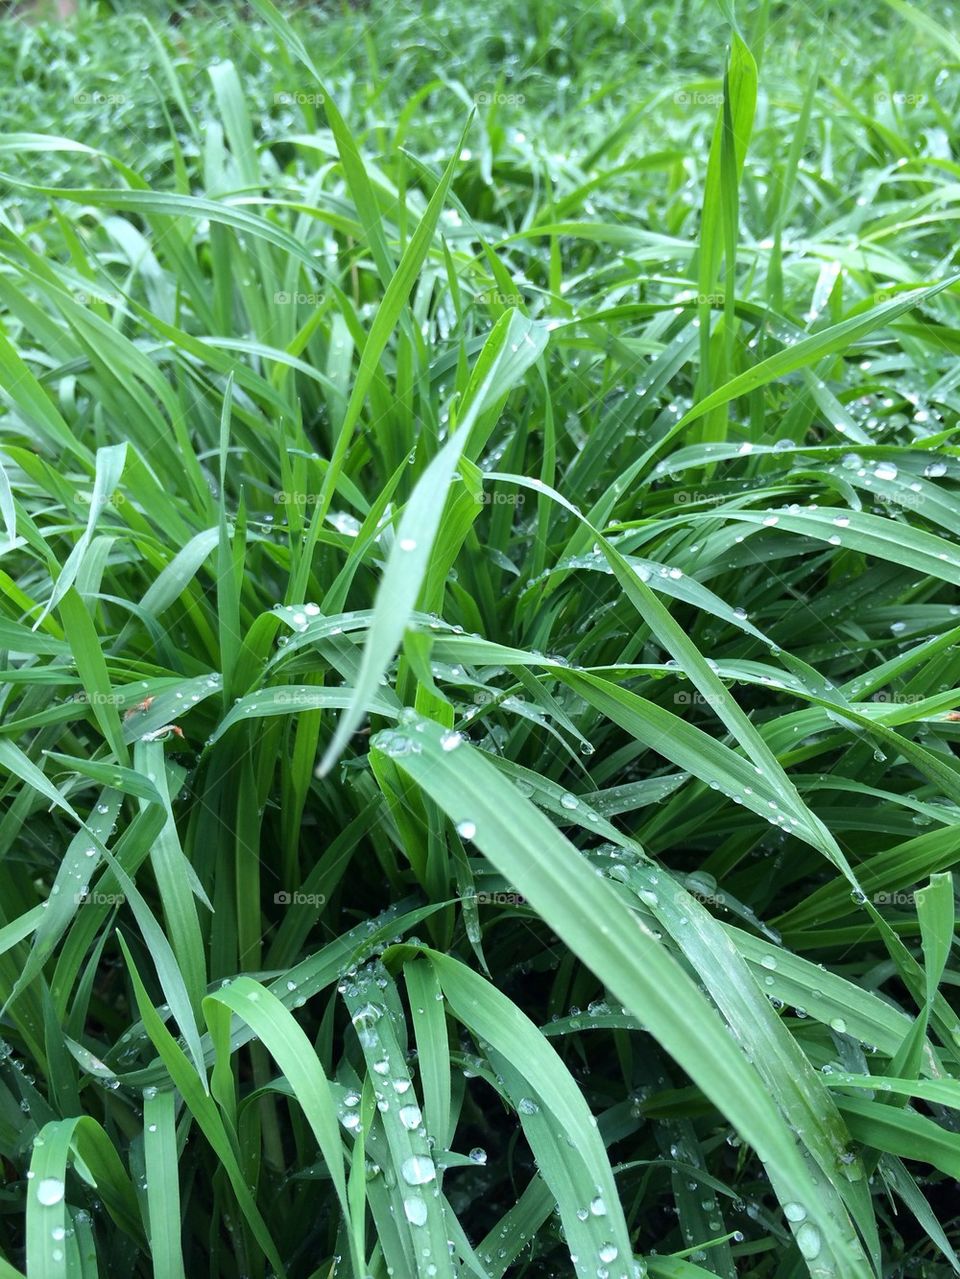 Tender grass with water droplets